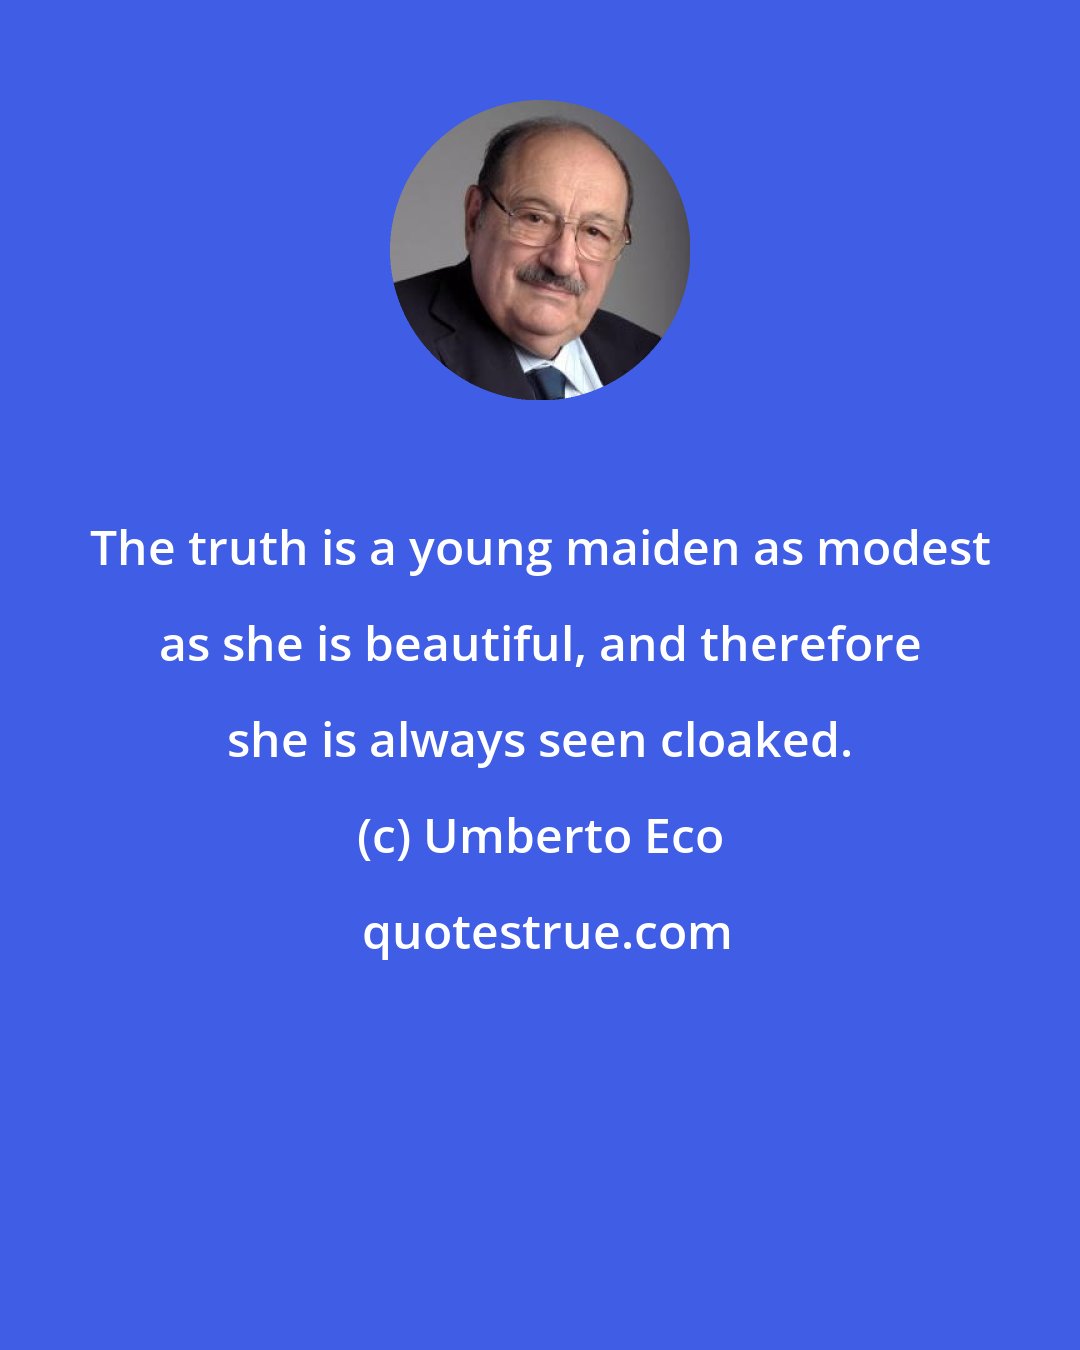 Umberto Eco: The truth is a young maiden as modest as she is beautiful, and therefore she is always seen cloaked.